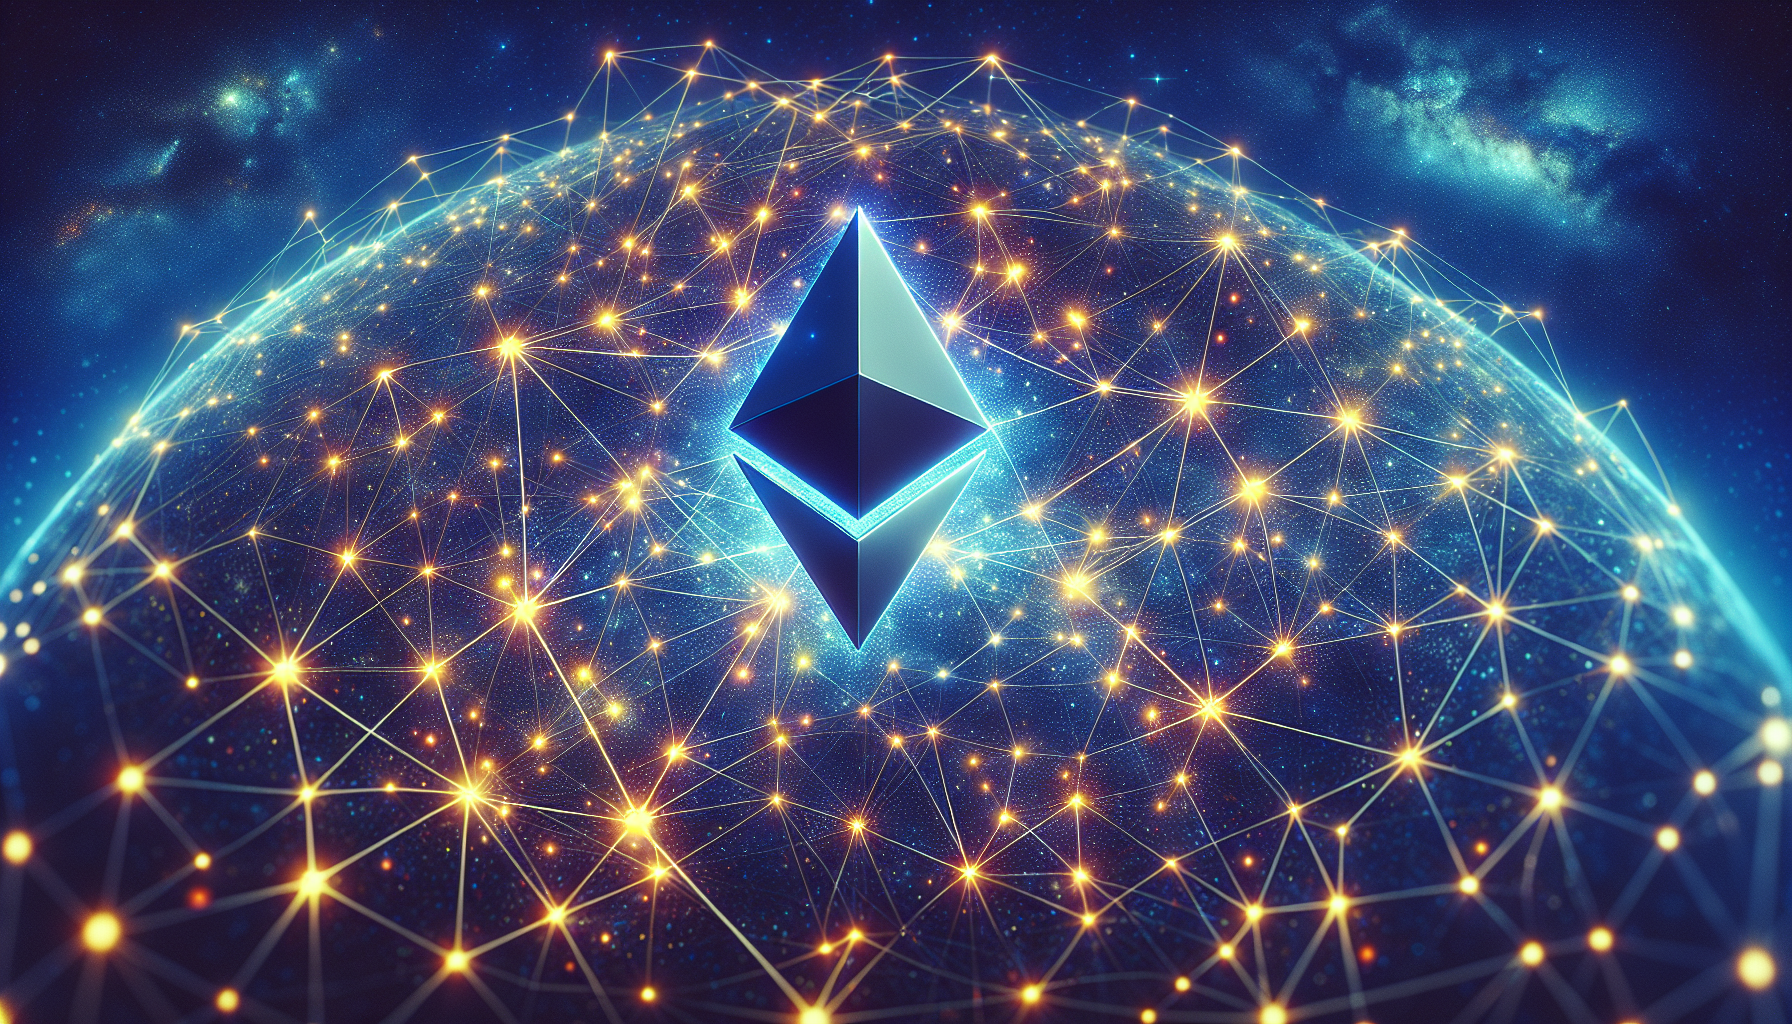 An image of the Ethereum logo connecting the world